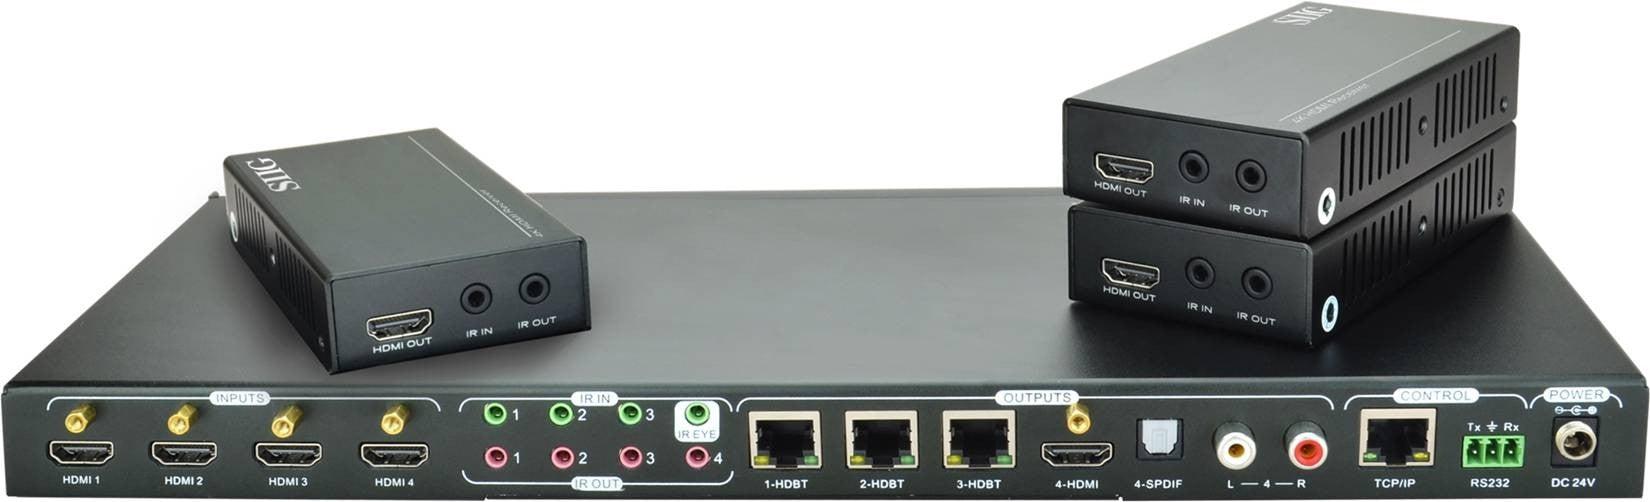 Siig Ce-H23W11-S1 Video Switch Hdmi